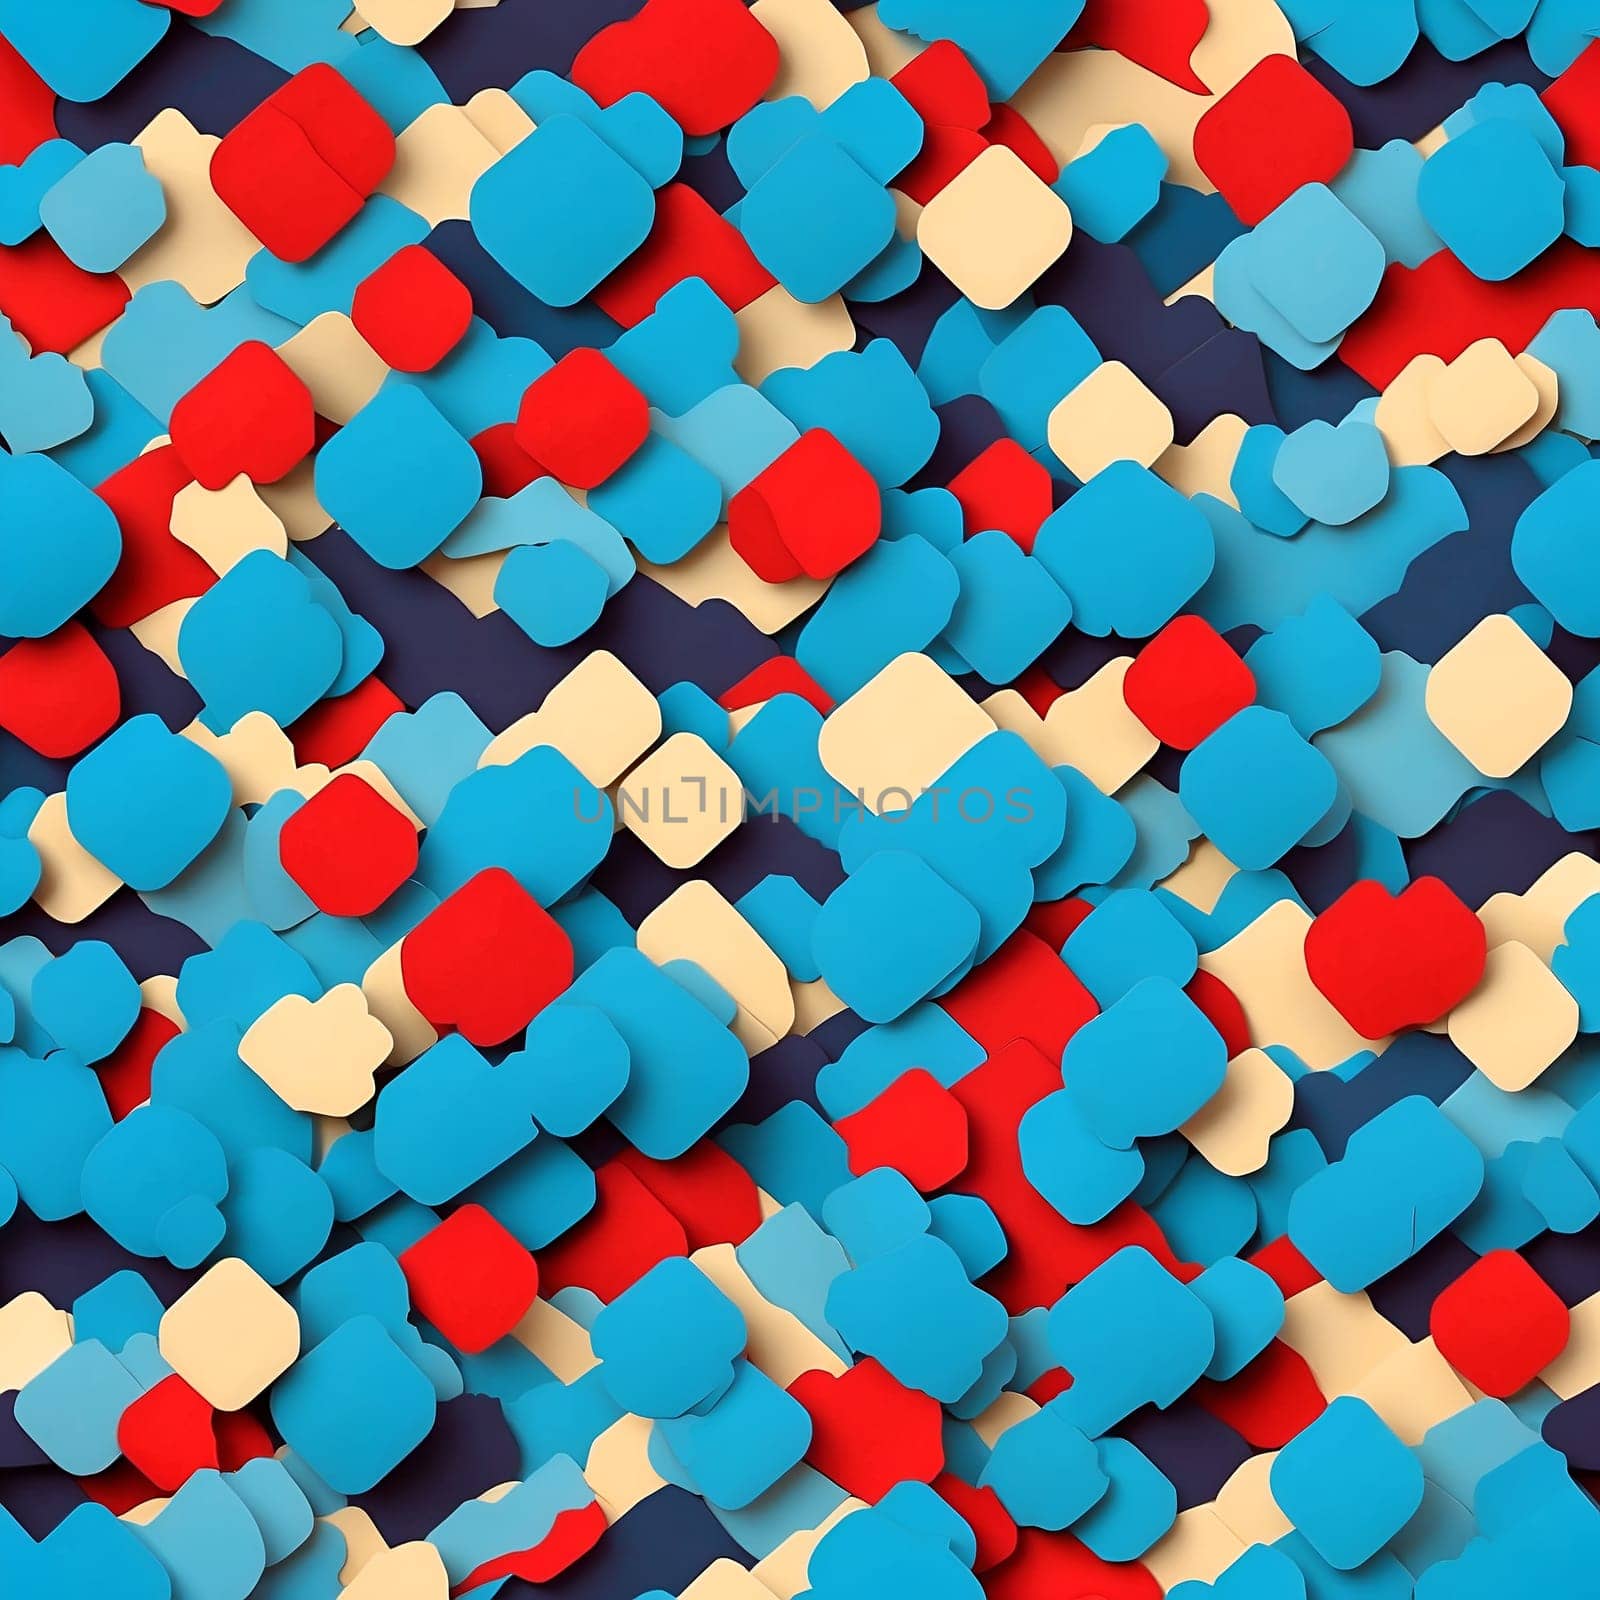 A vibrant seamless pattern featuring a large multitude of blue and red shapes arranged in a captivating design.